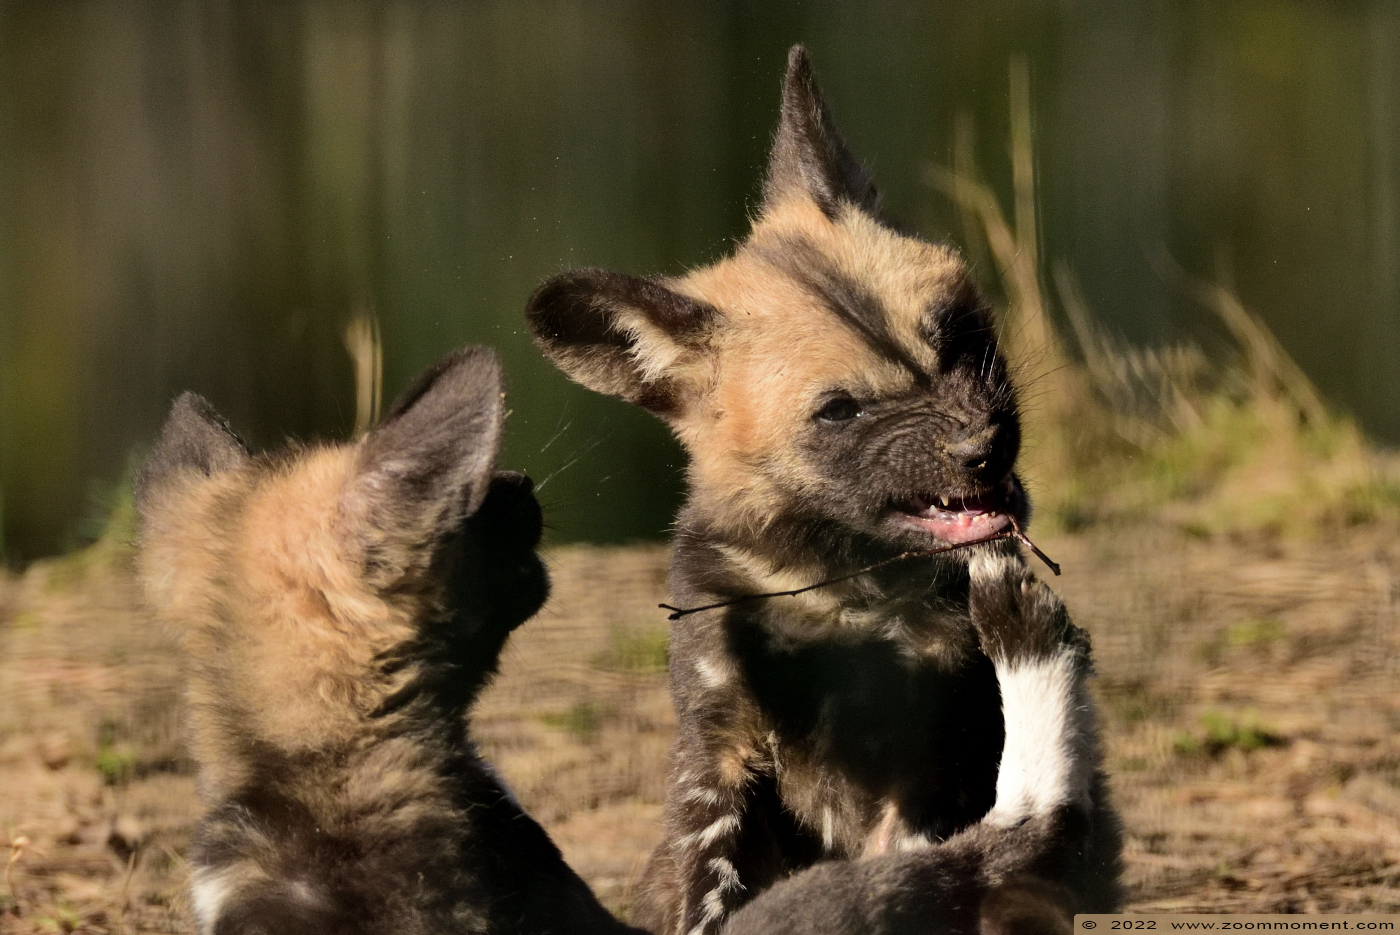 Afrikaanse wilde hond ( Lycaon pictus ) African wild dog
Pups, born 10 Januari 2022, on the picture about 3 weeks old
Trefwoorden: Safaripark Beekse Bergen Afrikaanse wilde hond Lycaon pictus African wild dog pup